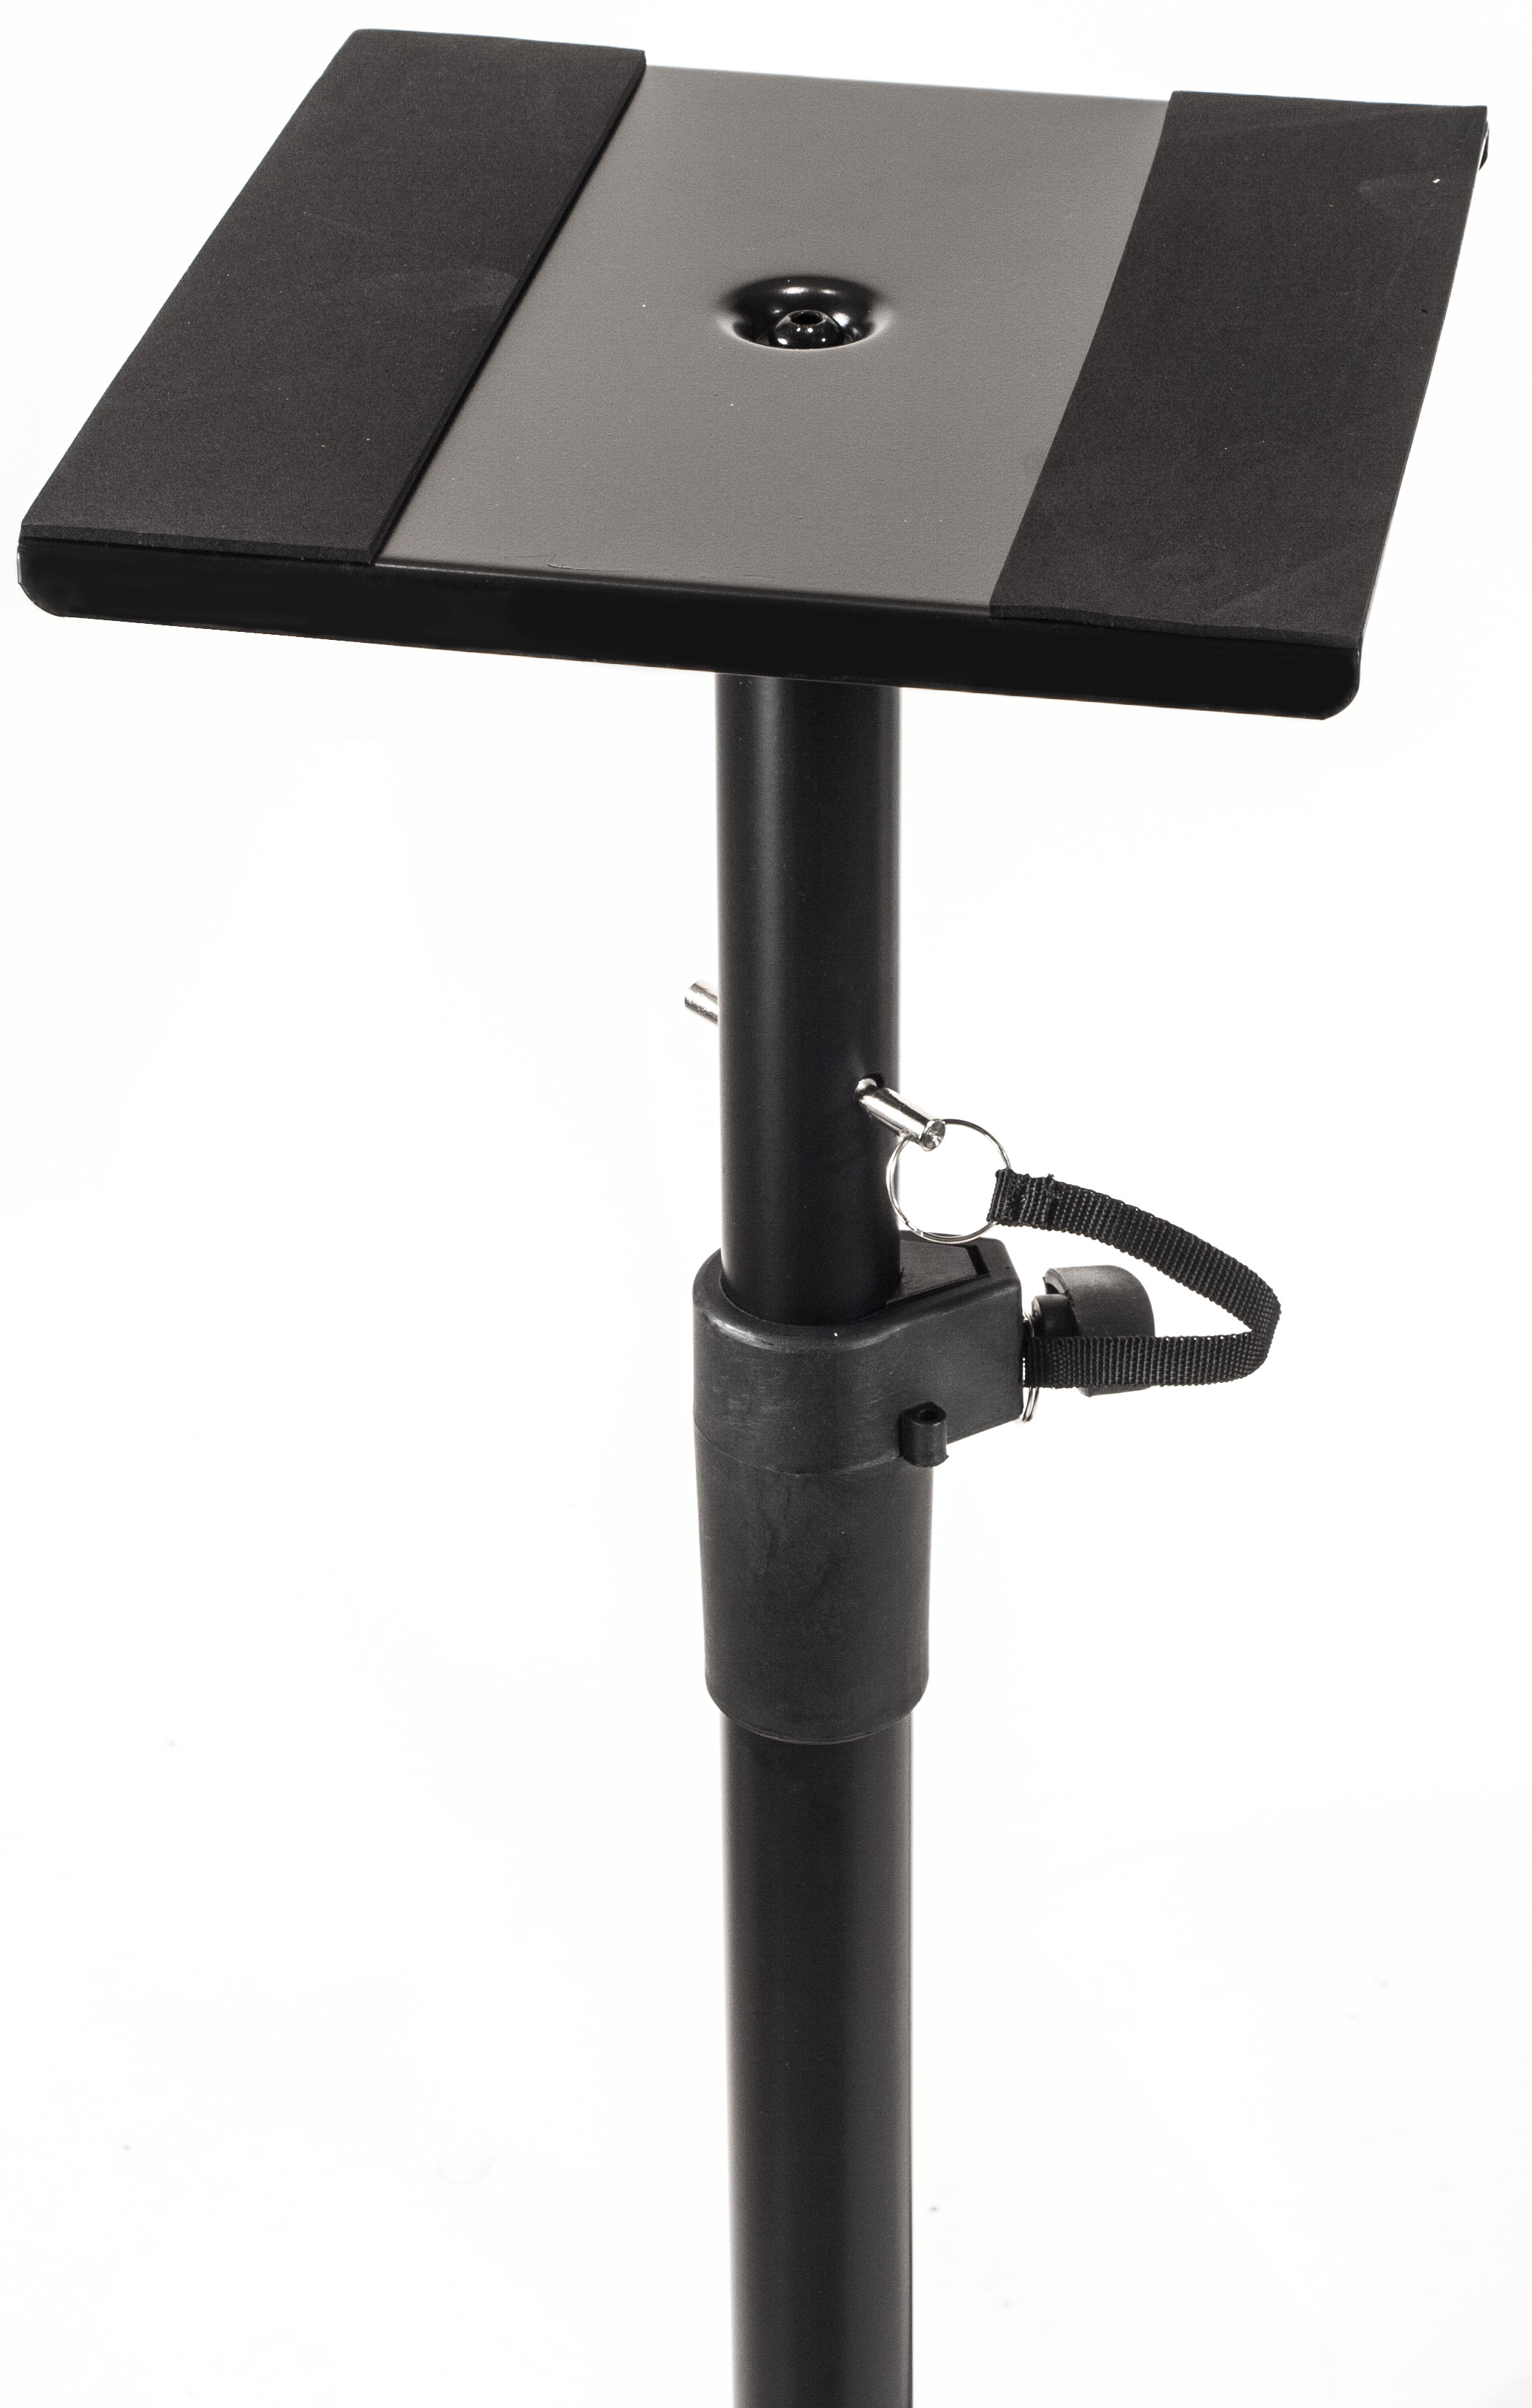 X-tone Xh 6300 Stand Moniteur Piece - Stand for studio - Variation 1